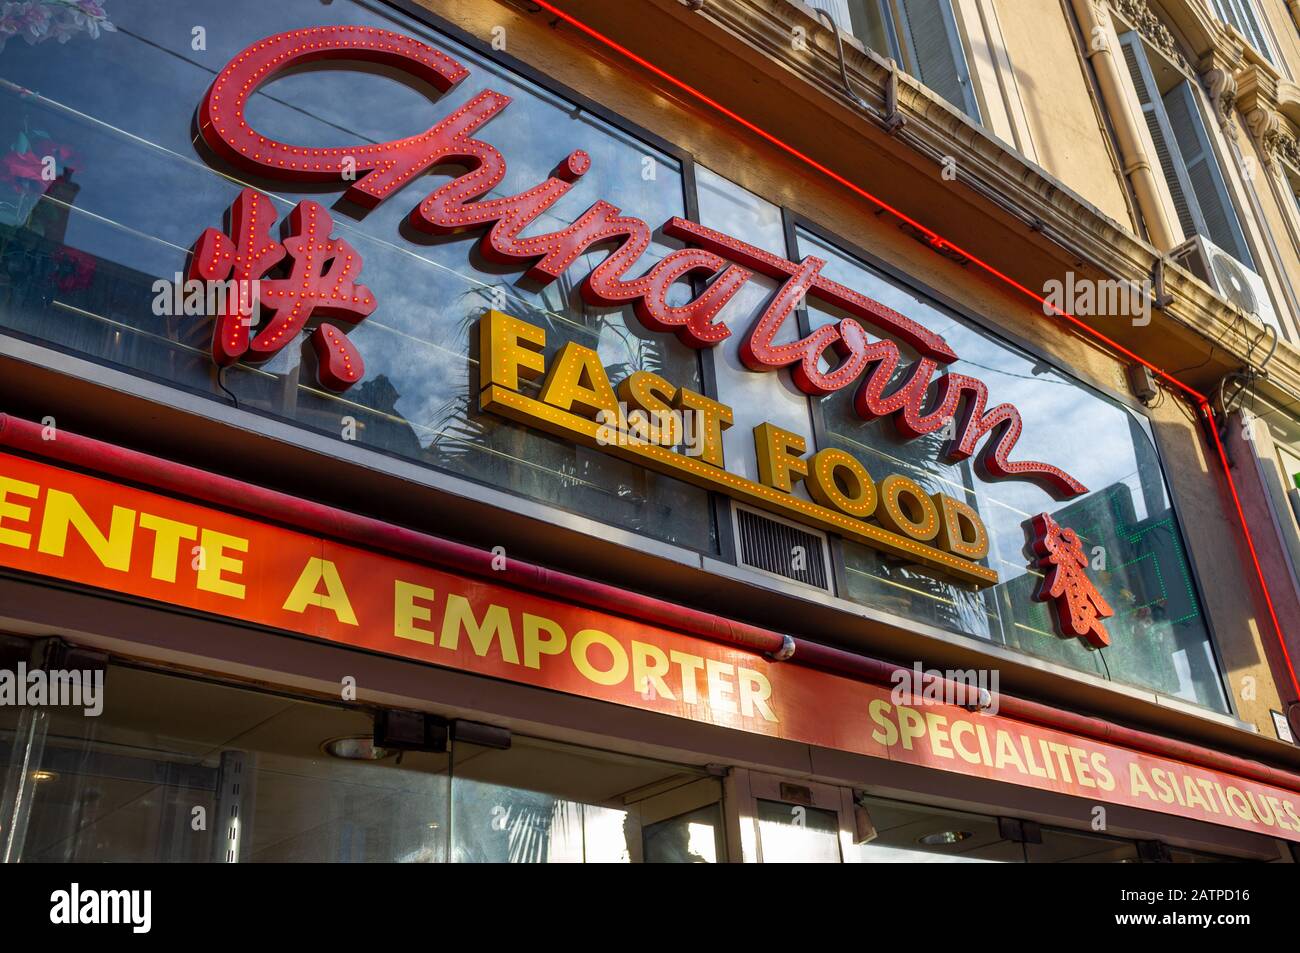 FRANCE, CAUSSADE, RUE DE LA REPUBLIQUE - JULY 10, 2018: A Chinese  restaurant in a typical french street Stock Photo - Alamy